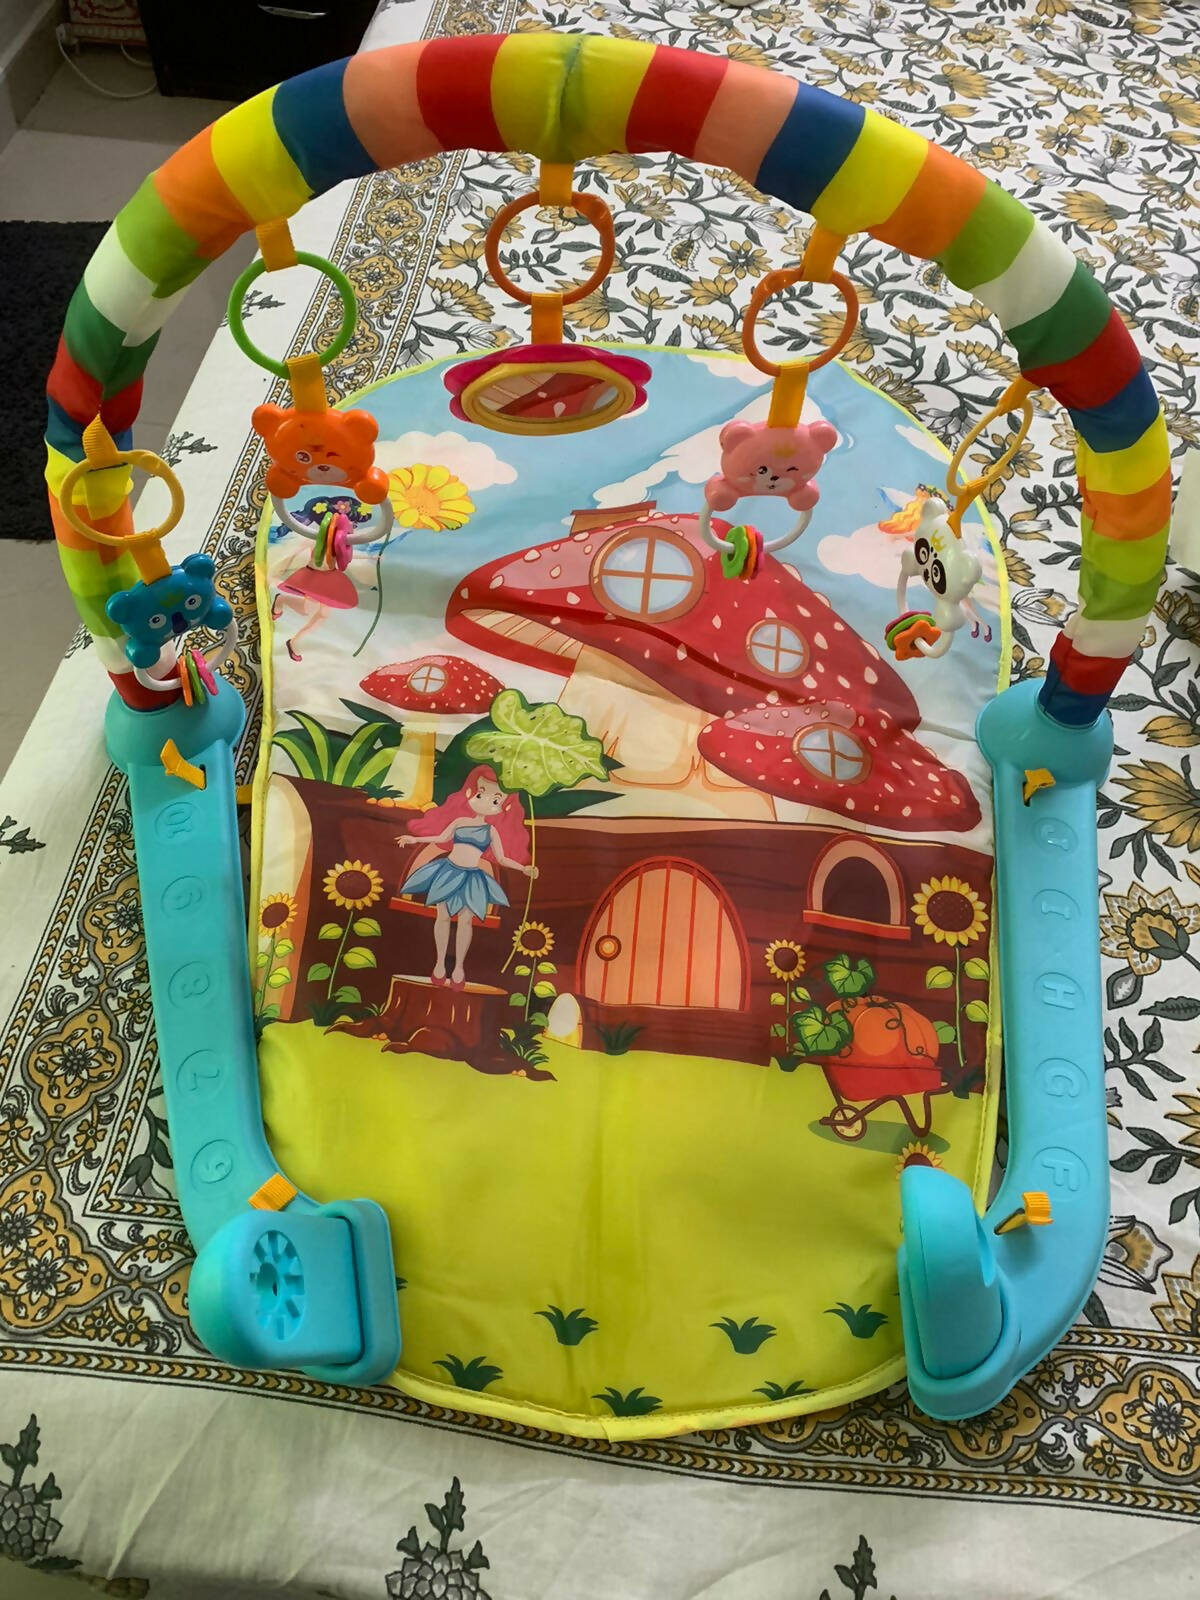 Playgym for Baby- Play on Baby.!